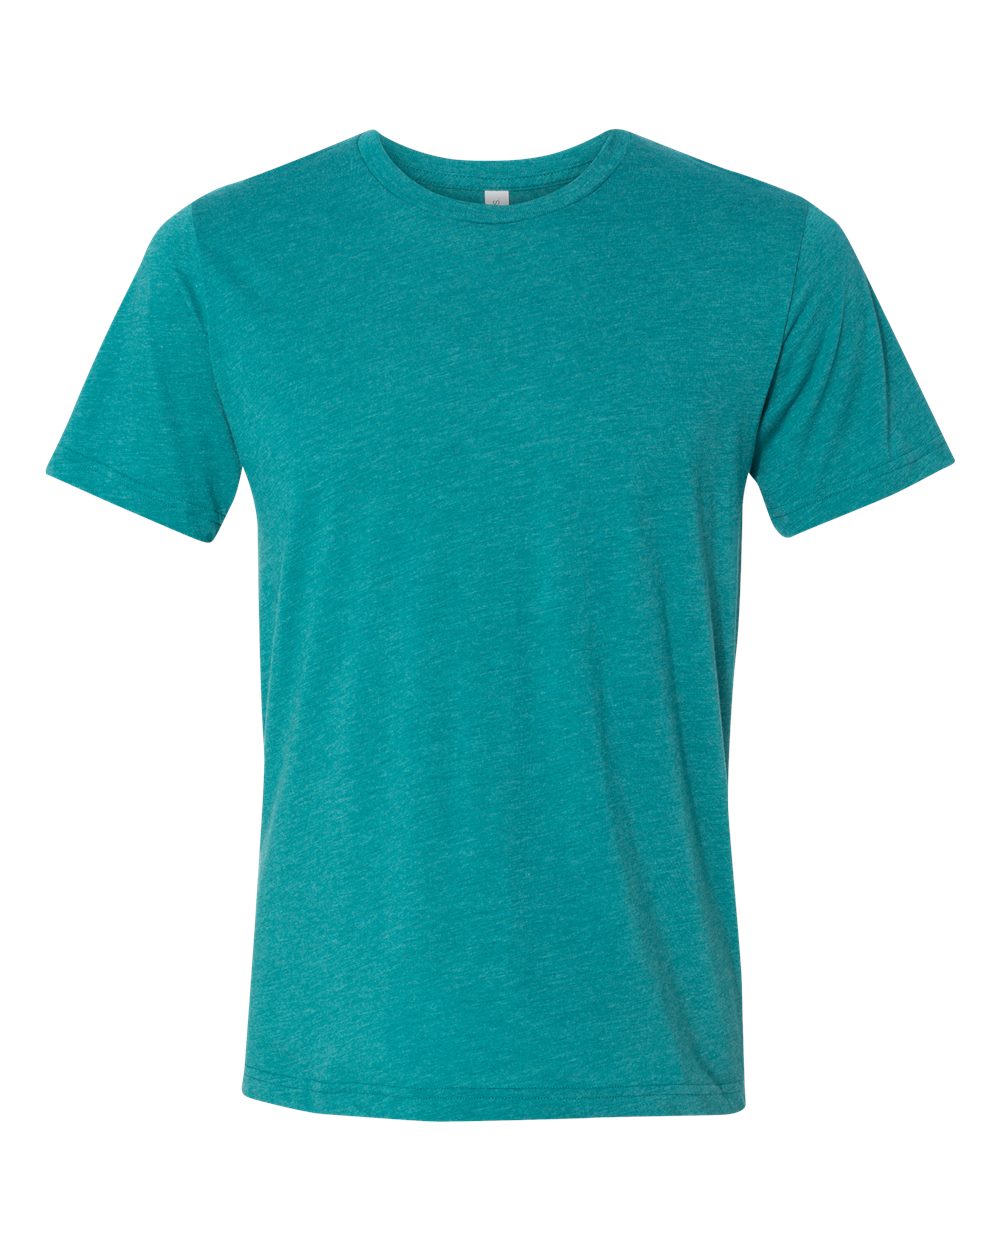 click to view Teal Triblend